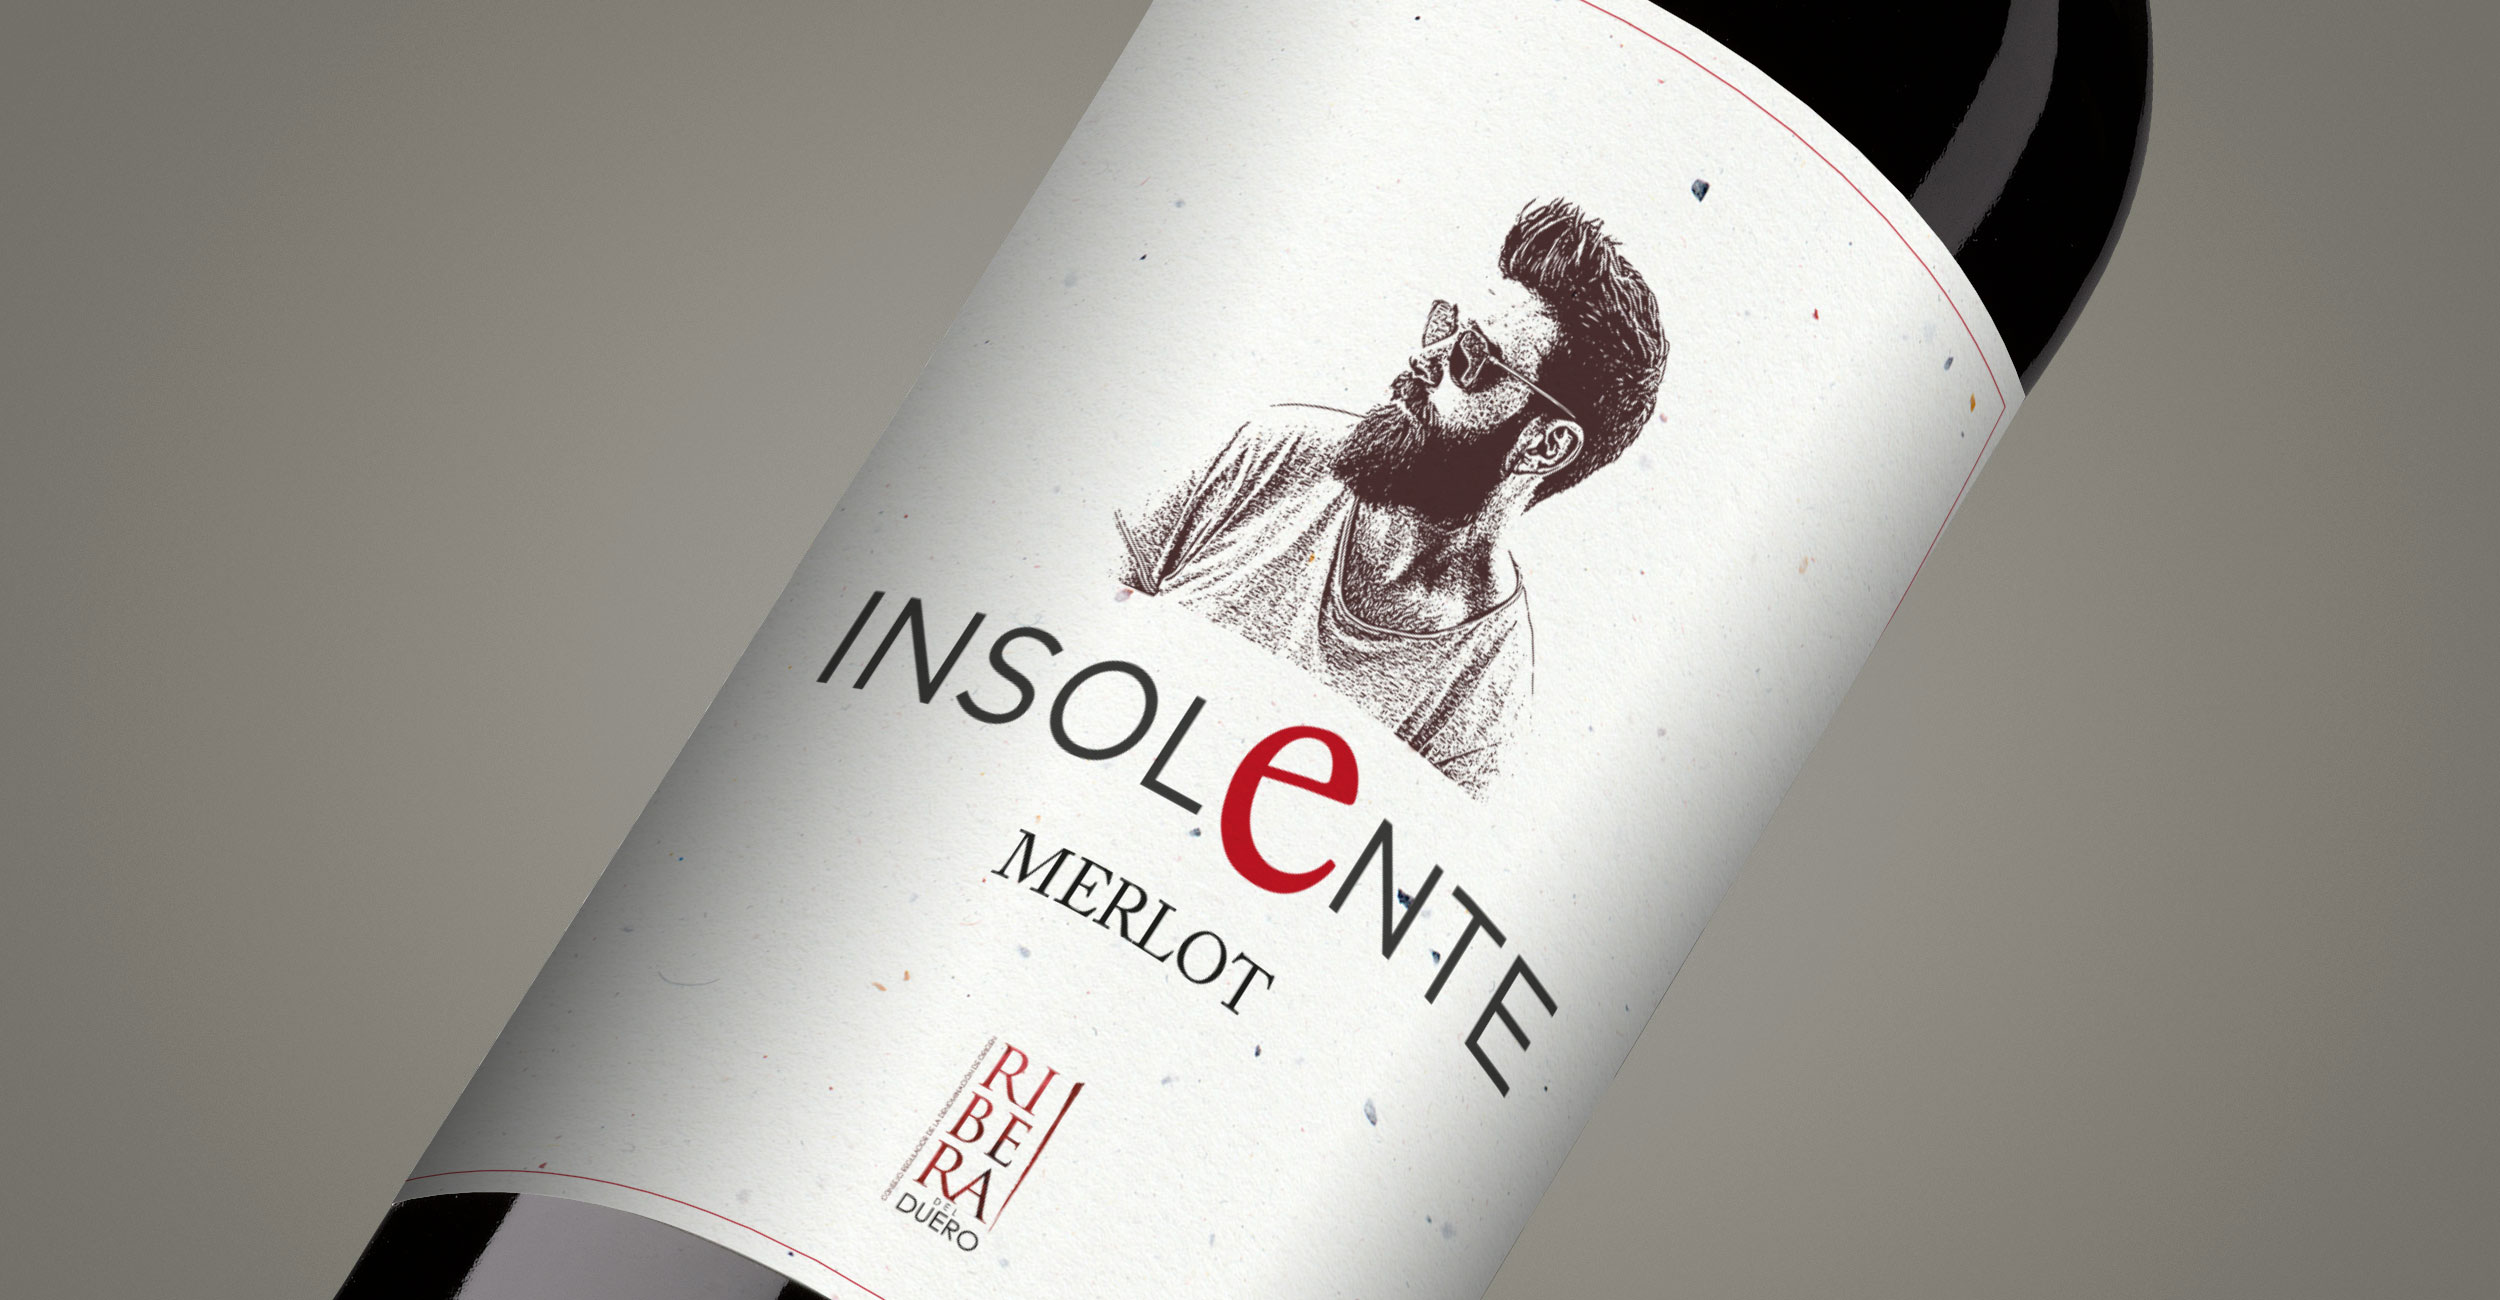 Graphic and creative design of wine labels and packaging for INSOLENTE